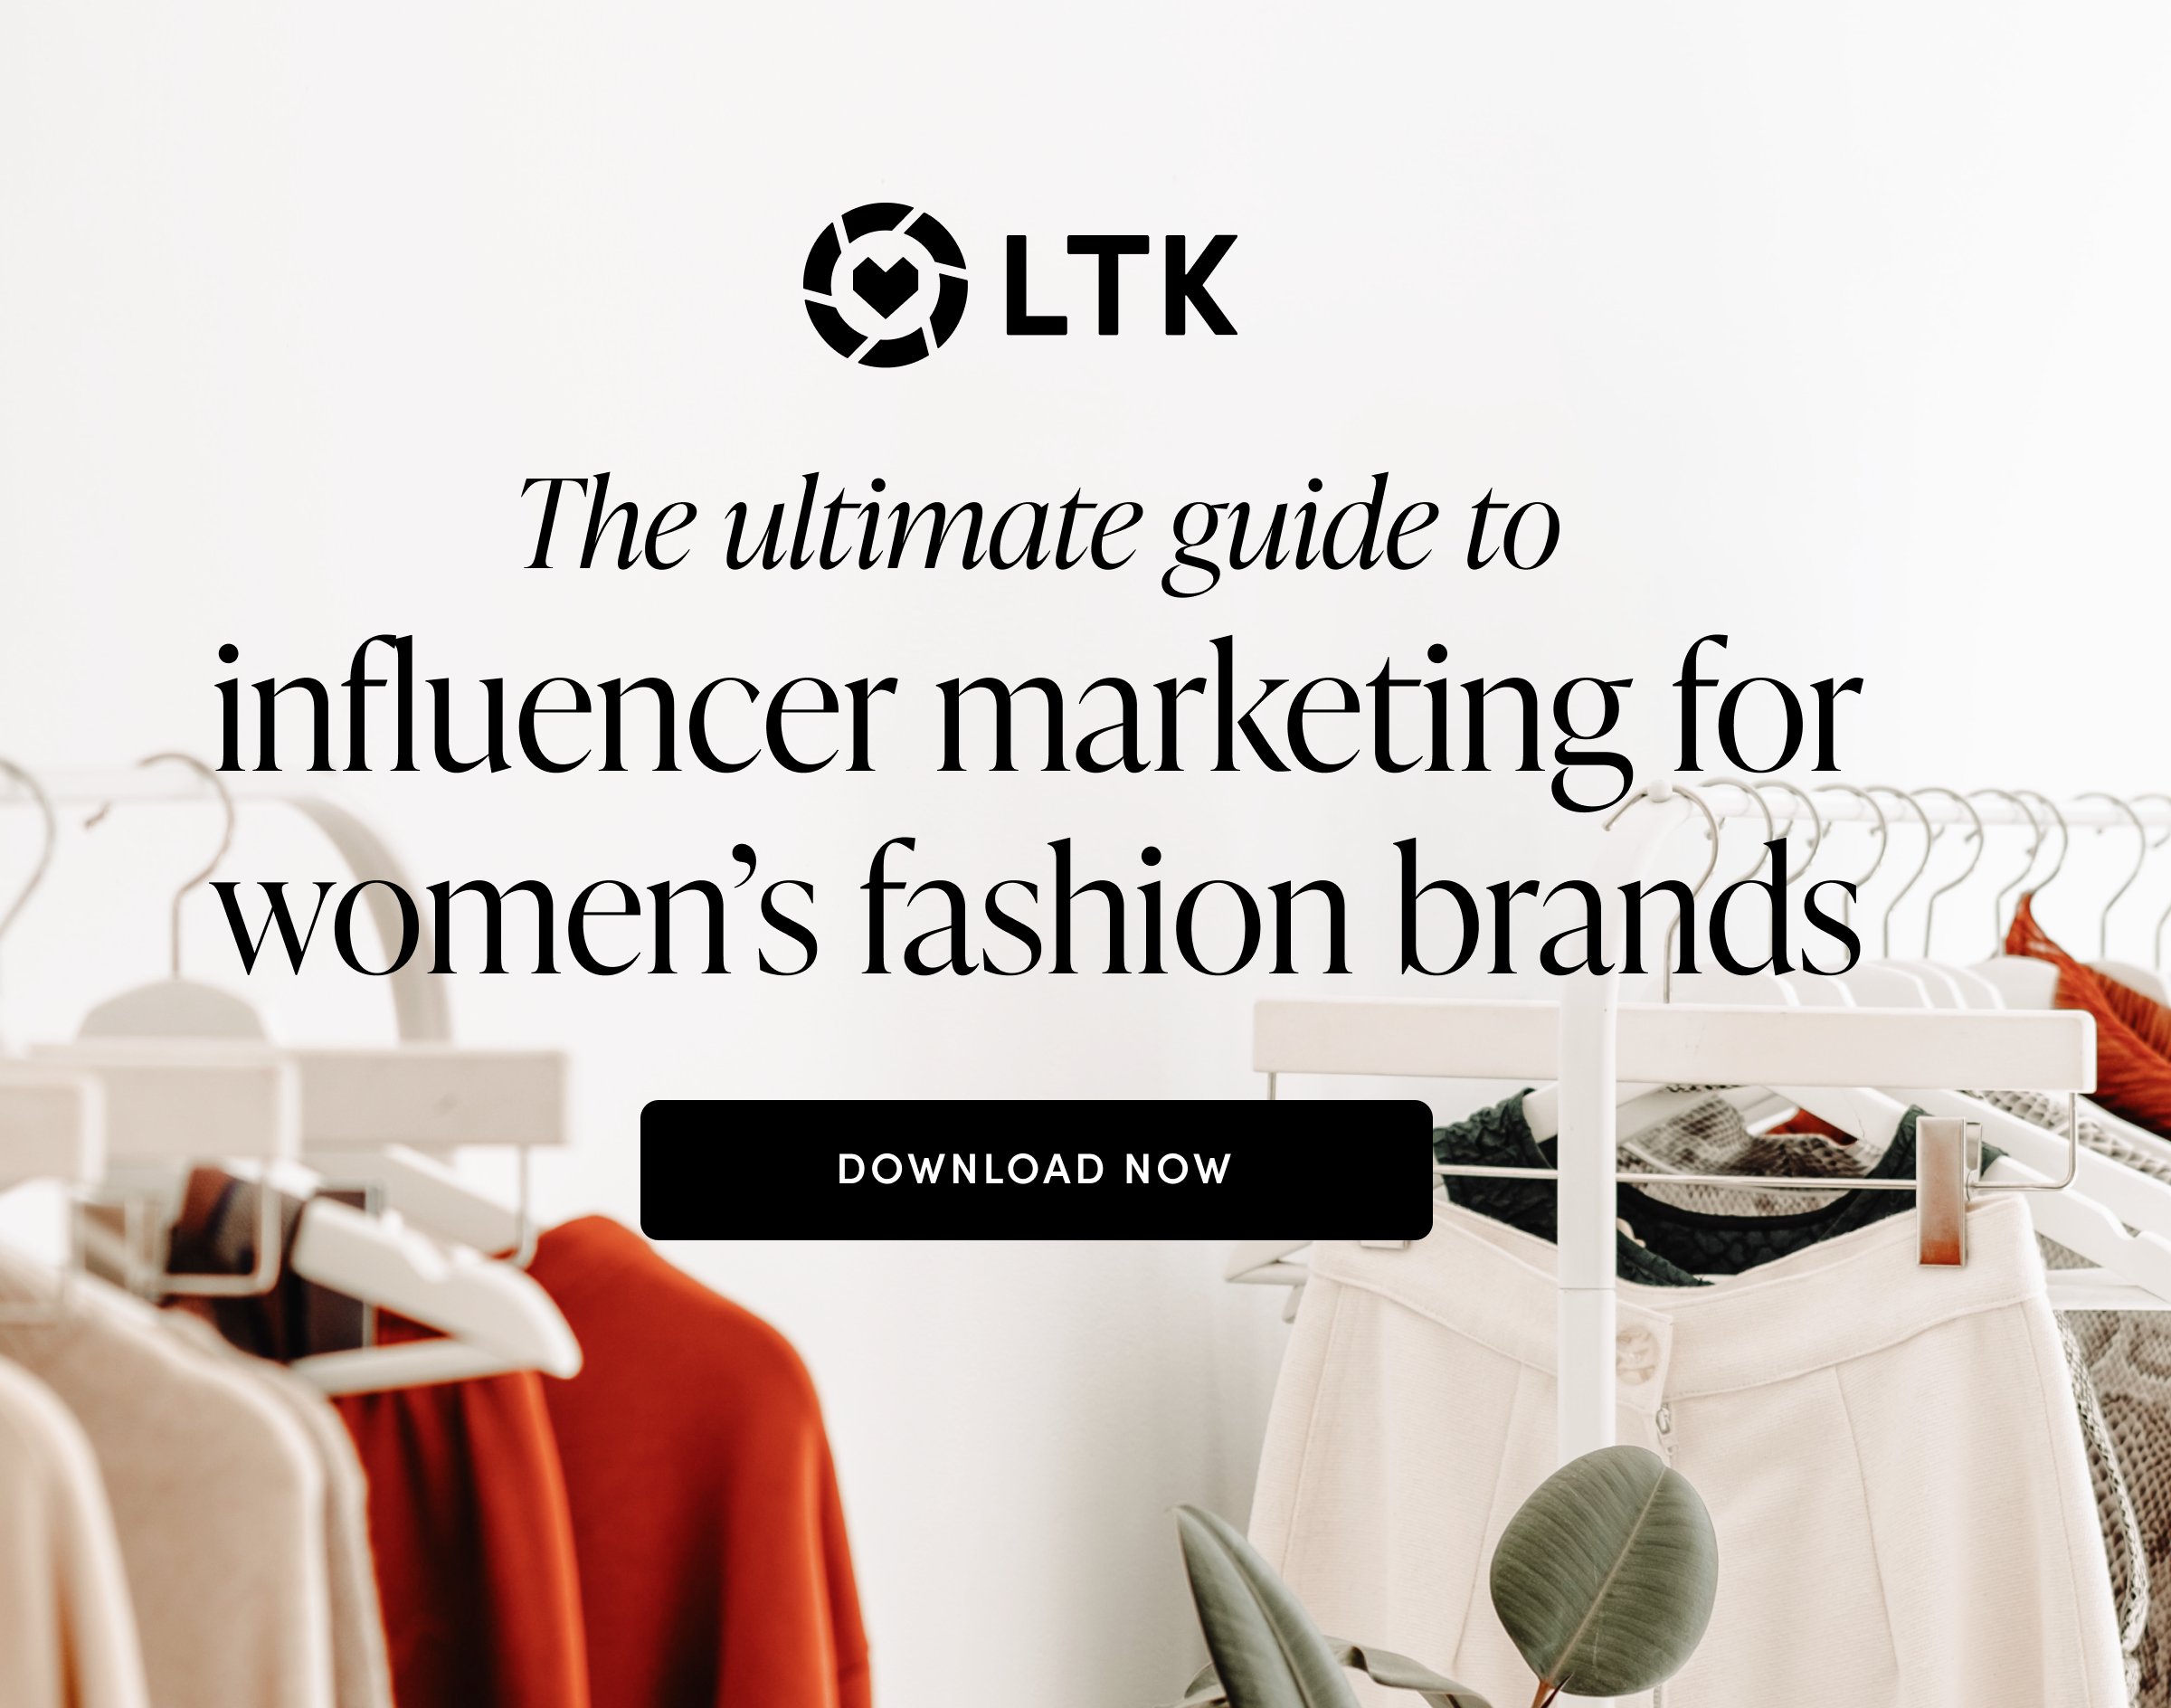 LTK - The ultimate guide to influencer marketing for women’s fashion brands - DOWNLOAD NOW